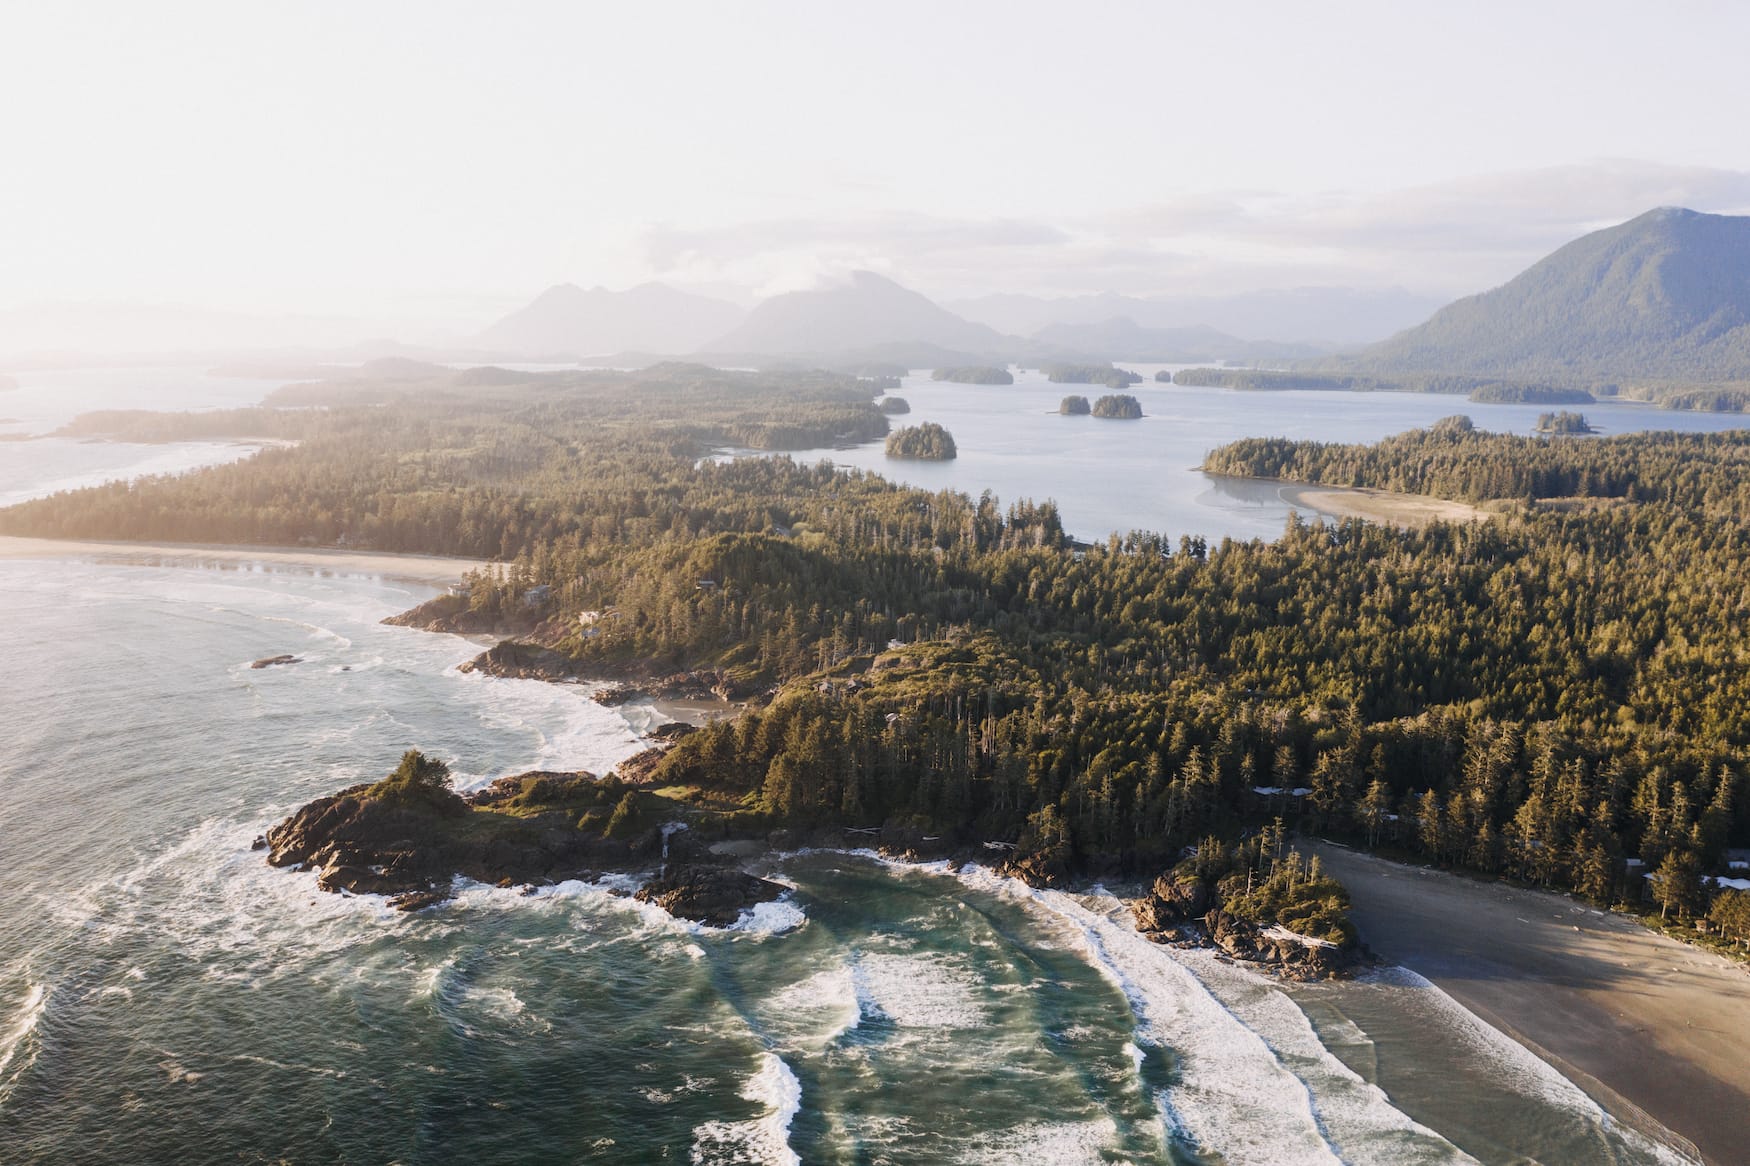 Wild Pacific Rim National Park on Vancouver Island